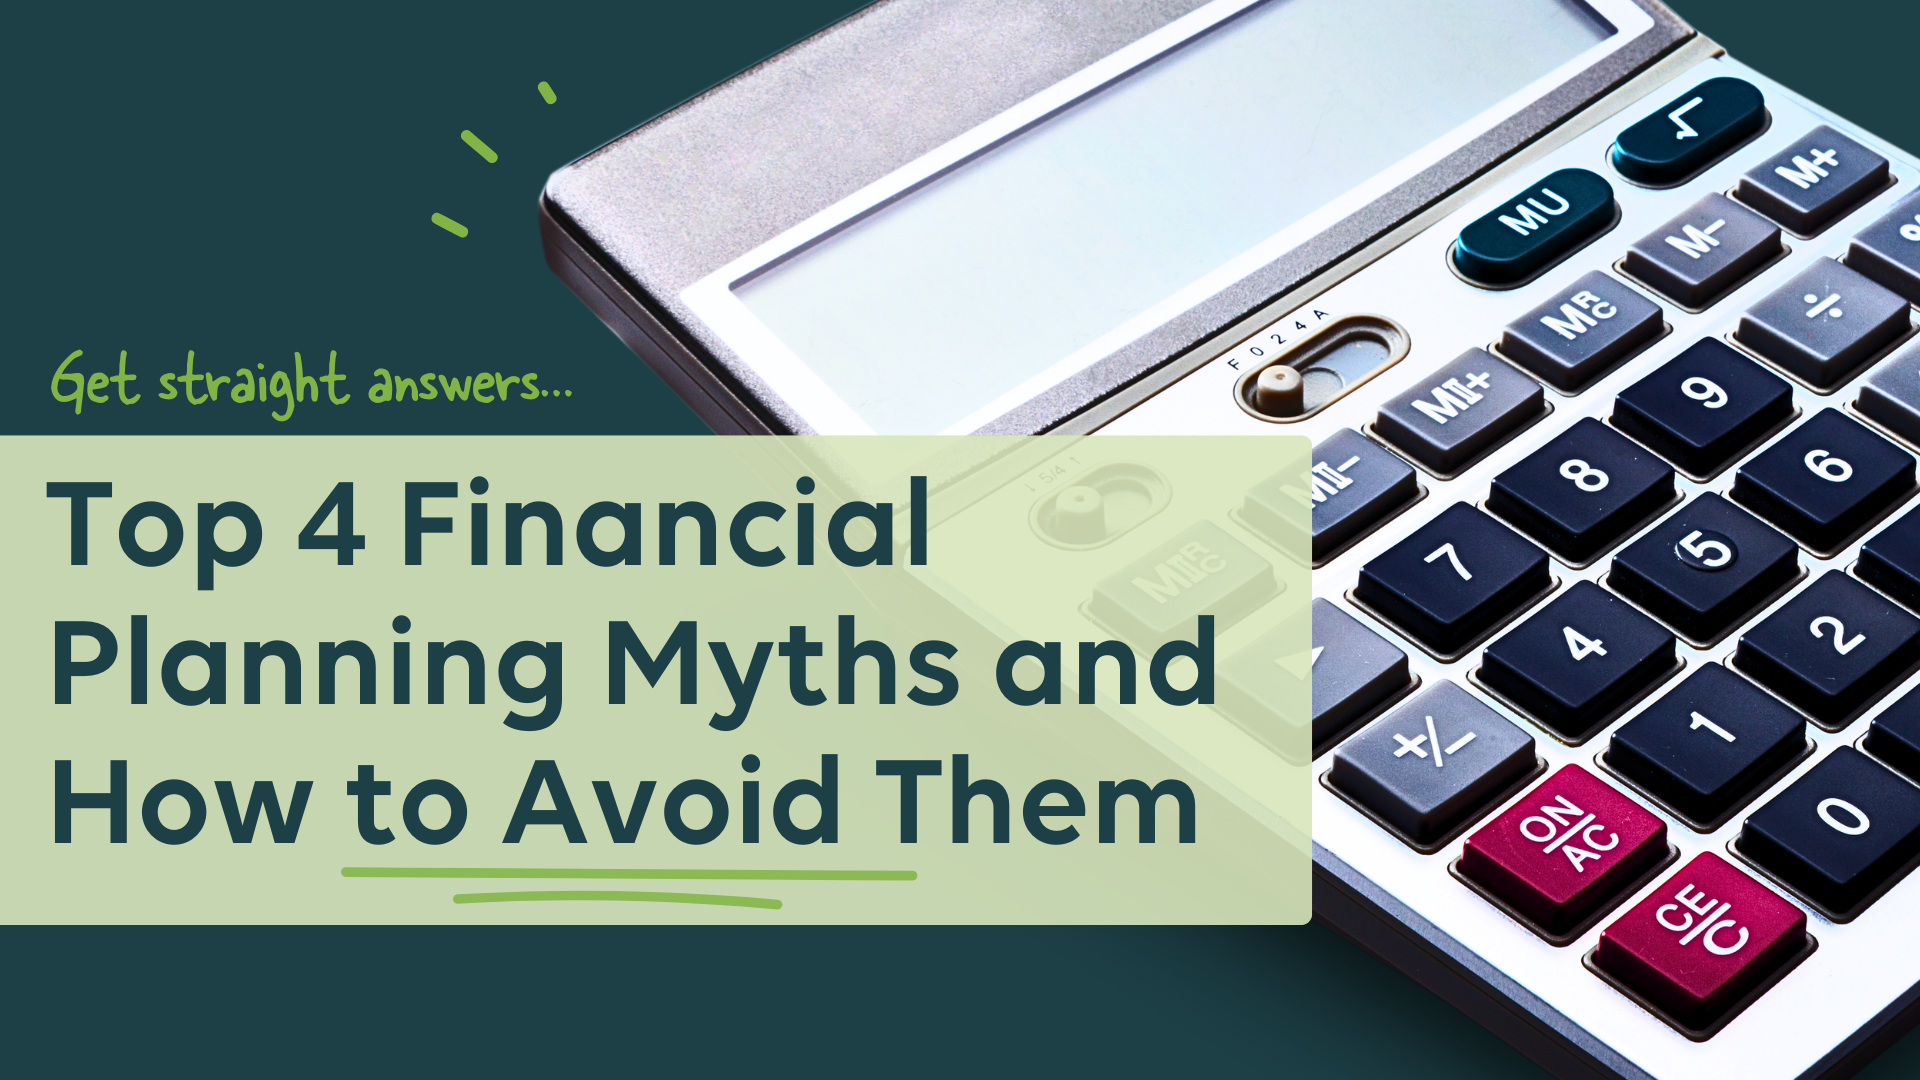 Photo of Top 4 Financial Planning Myths and How to Avoid Them with a calculator 